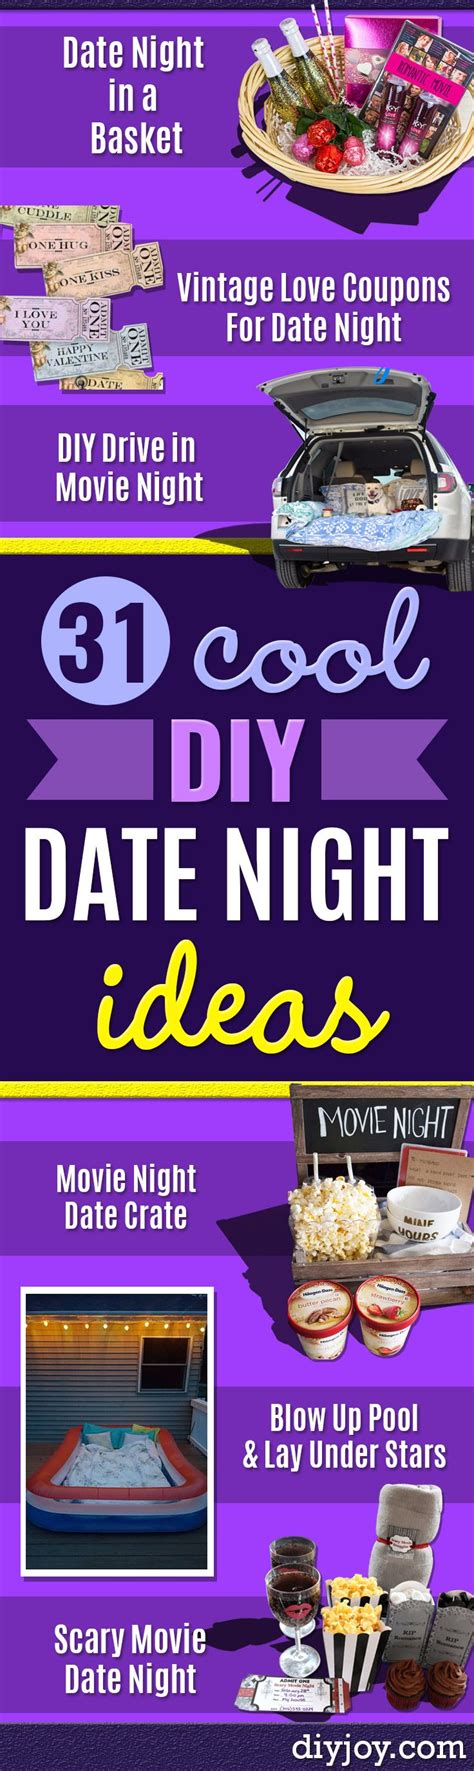 Diy Date Night Ideas Creative Ways To Go On Inexpensive Dates Creative Ways For Couples To